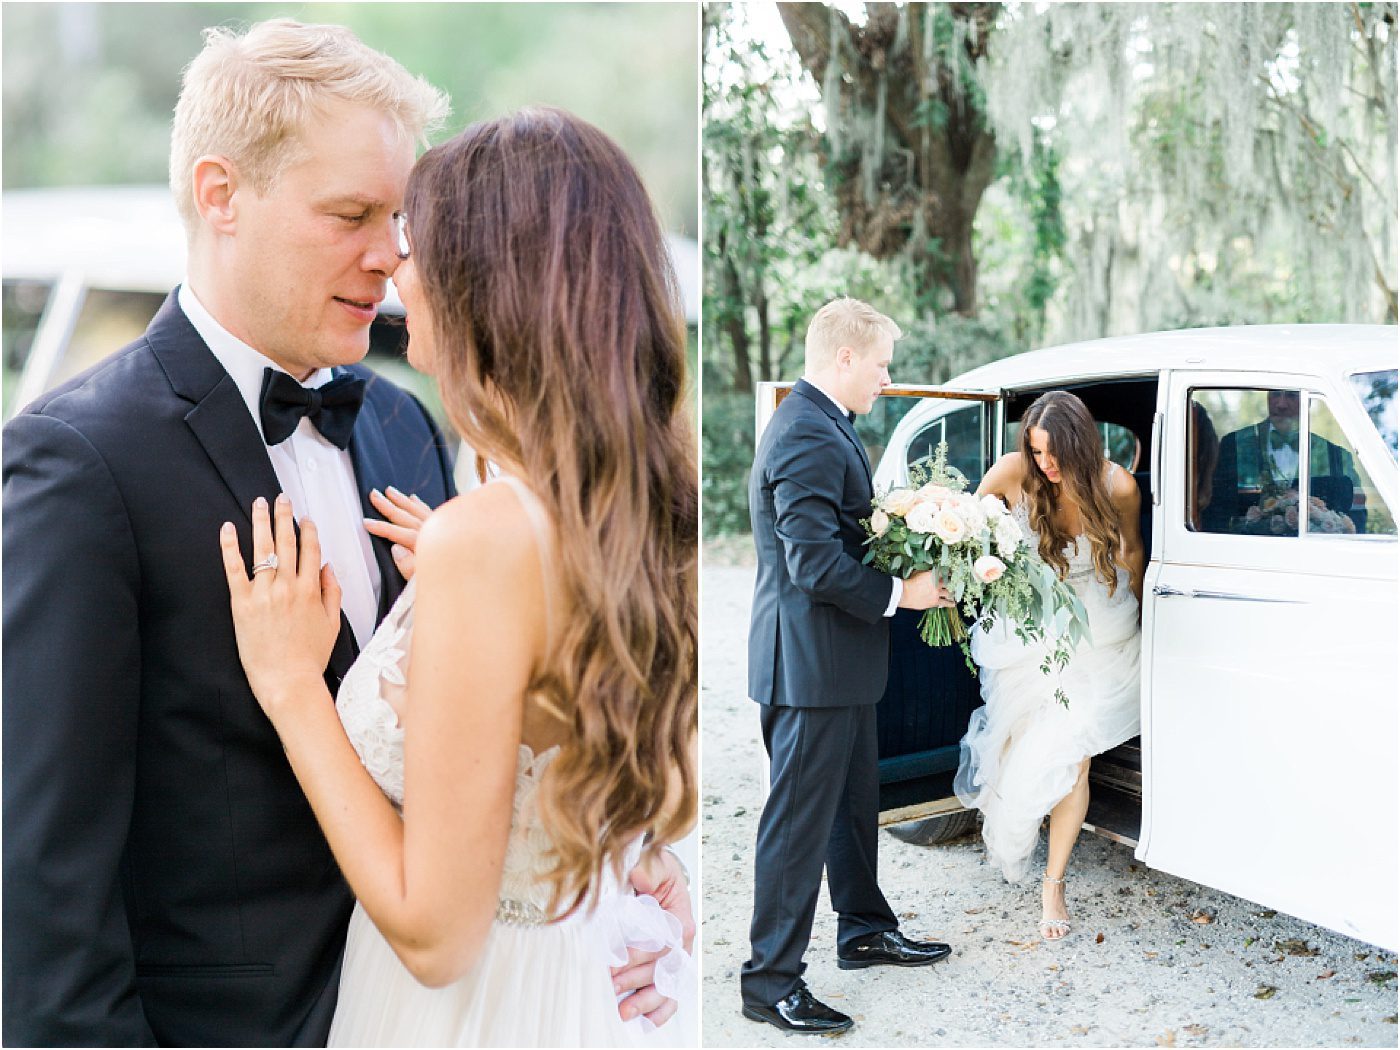 Dusty Blue Charleston Elopement at Magnolia Plantation by Catherine Ann Photography